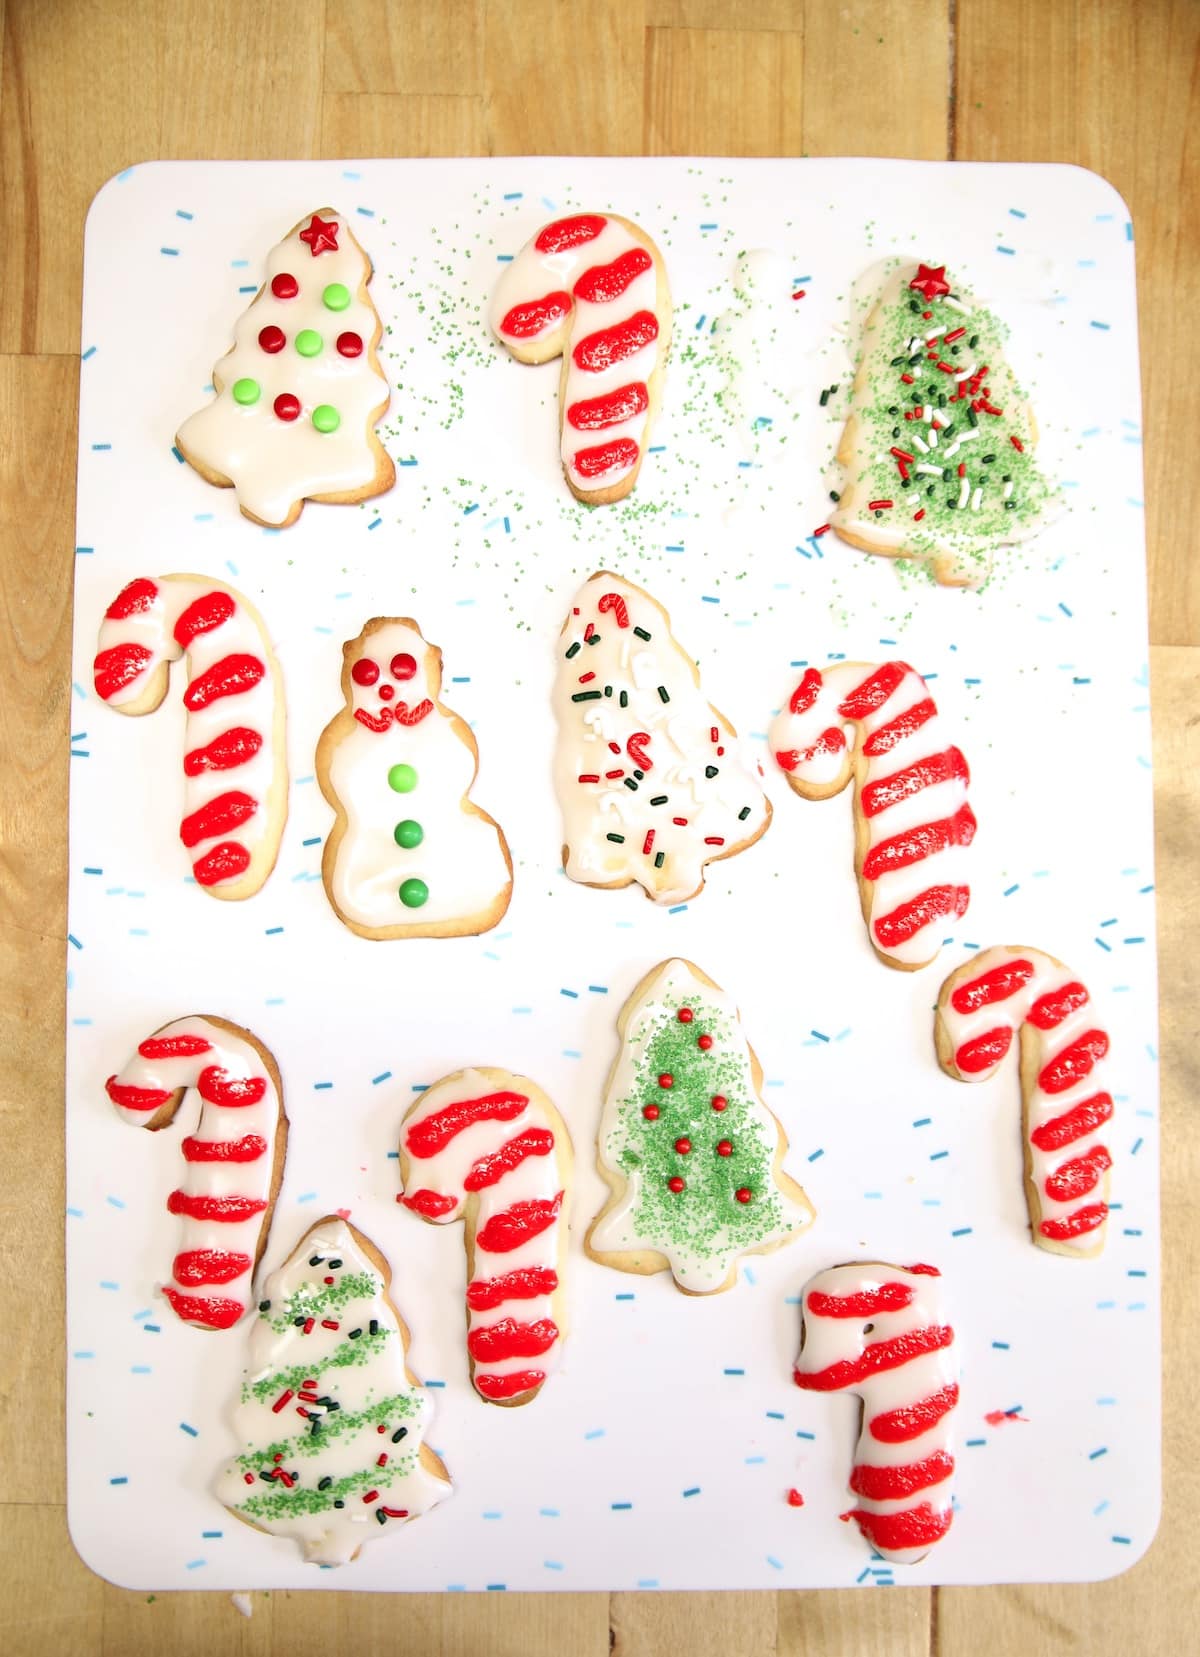 Decorated sugar cookies for Christmas on a white surface.